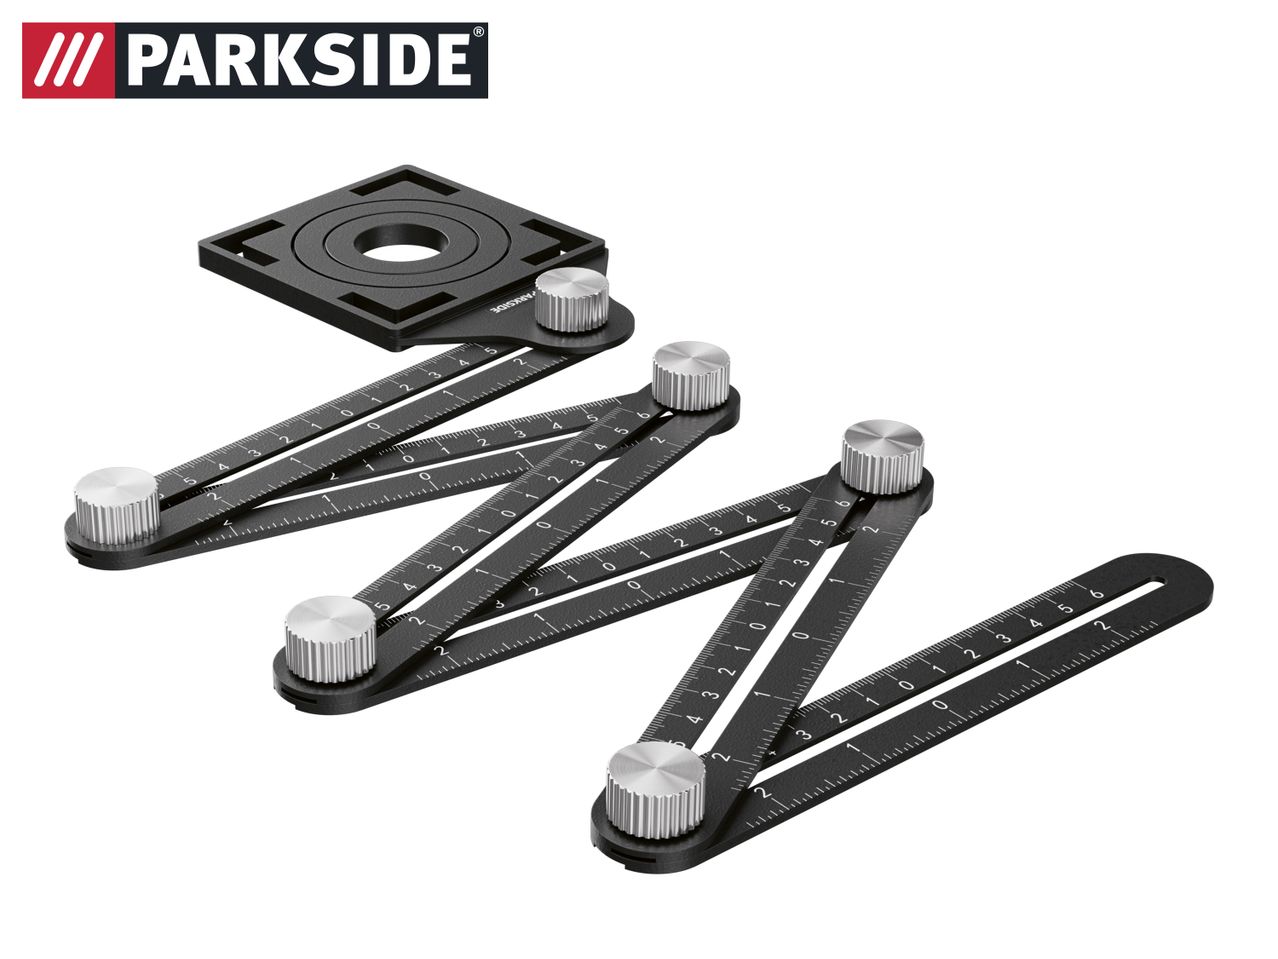 Go to full screen view: PARKSIDE Six-Sided Angle Measuring Tool / Combination Square - Image 4